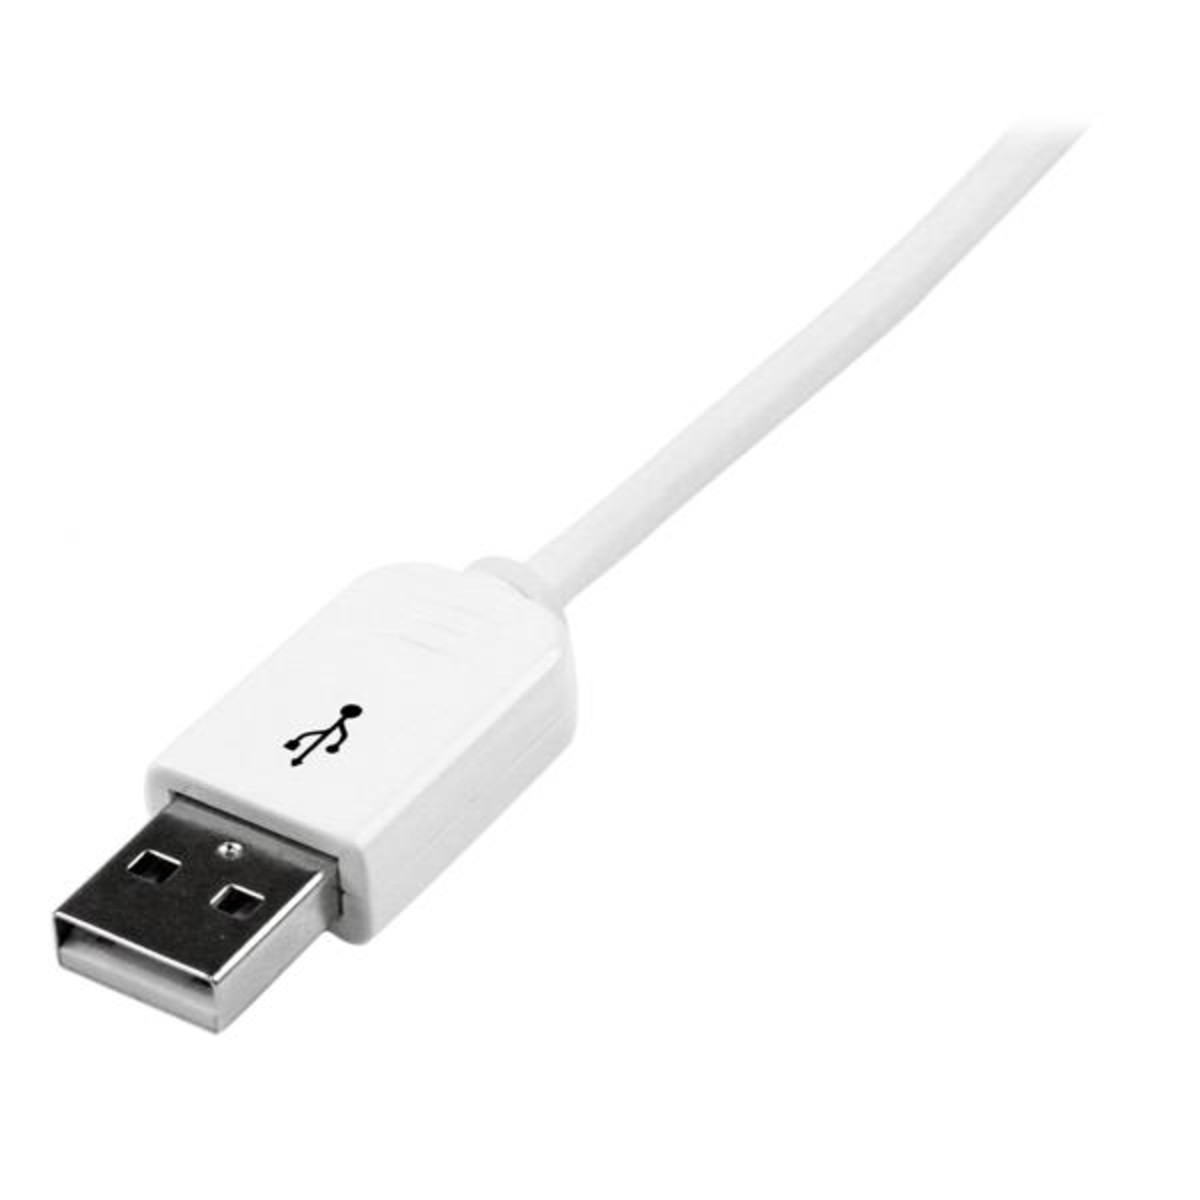 1m Apple Dock Connector to USB Cable